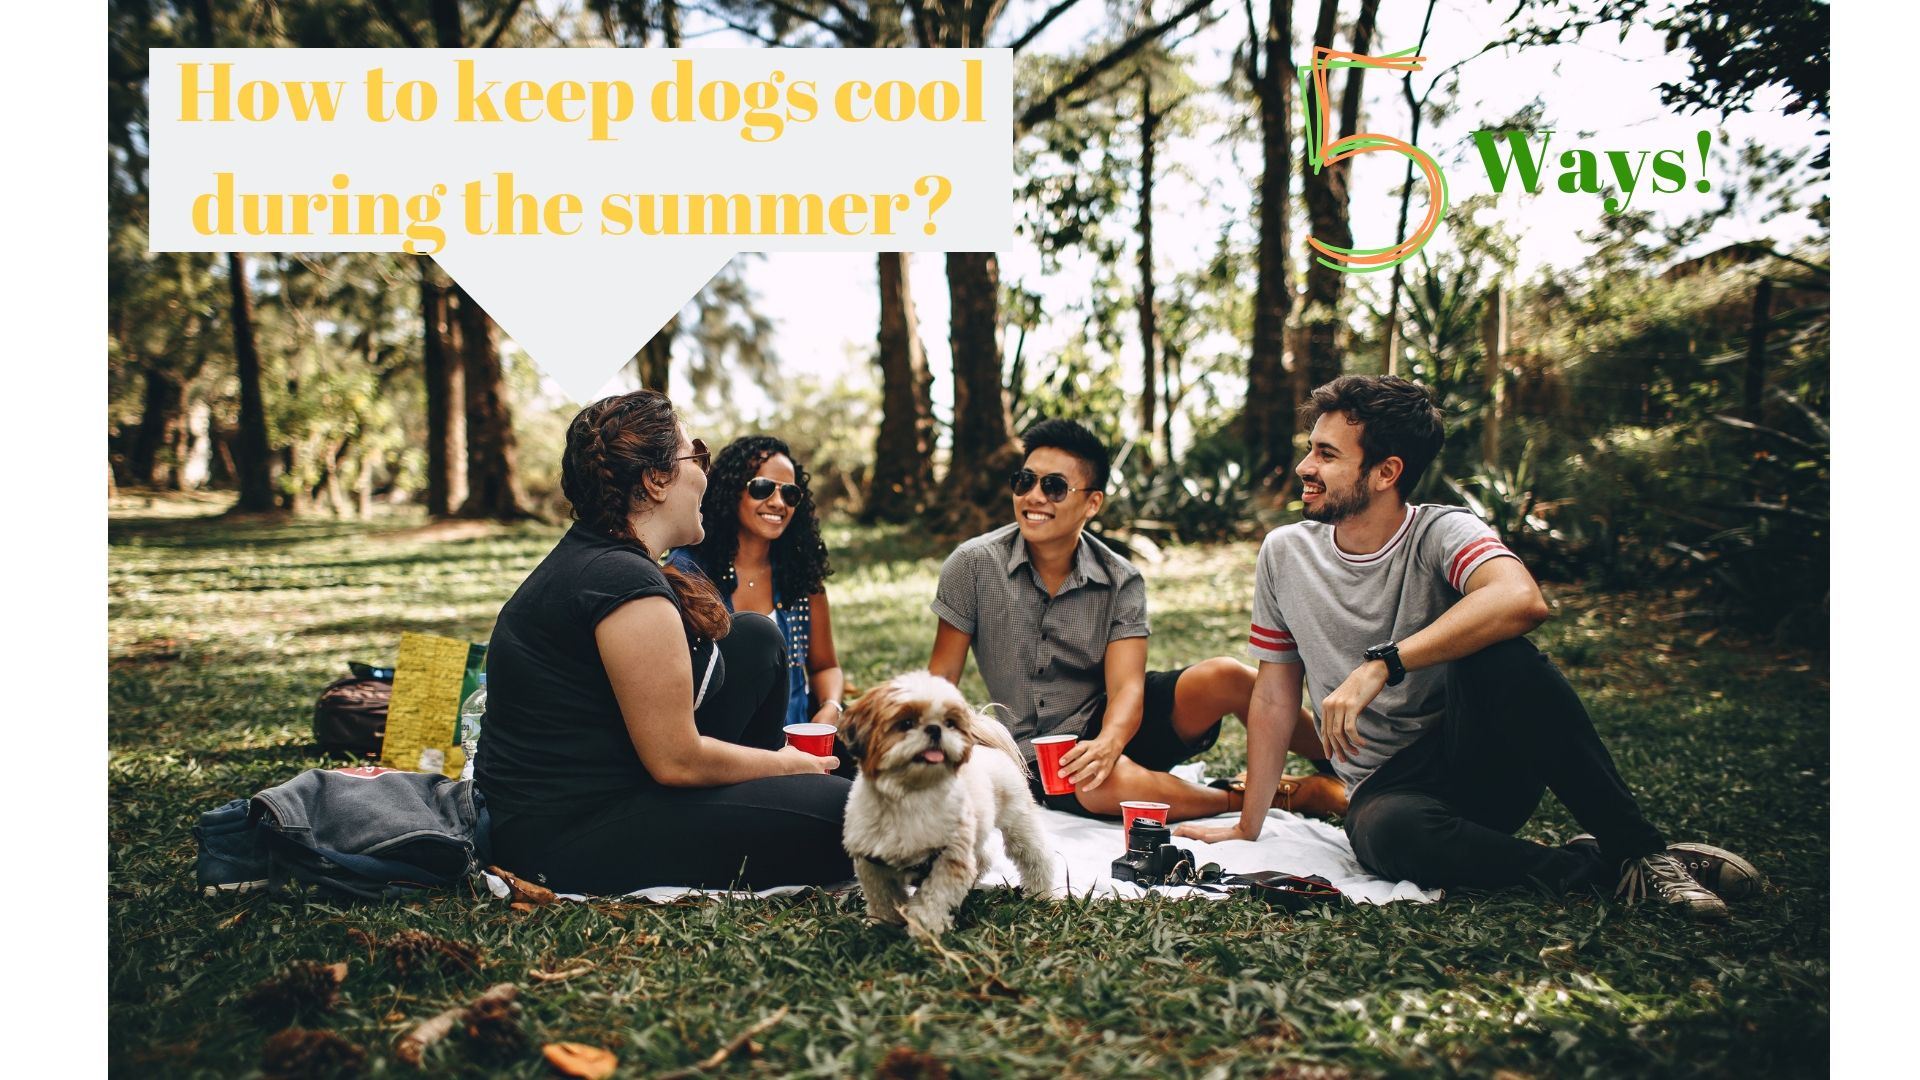 How to keep dogs cool during the summer (5 ways)